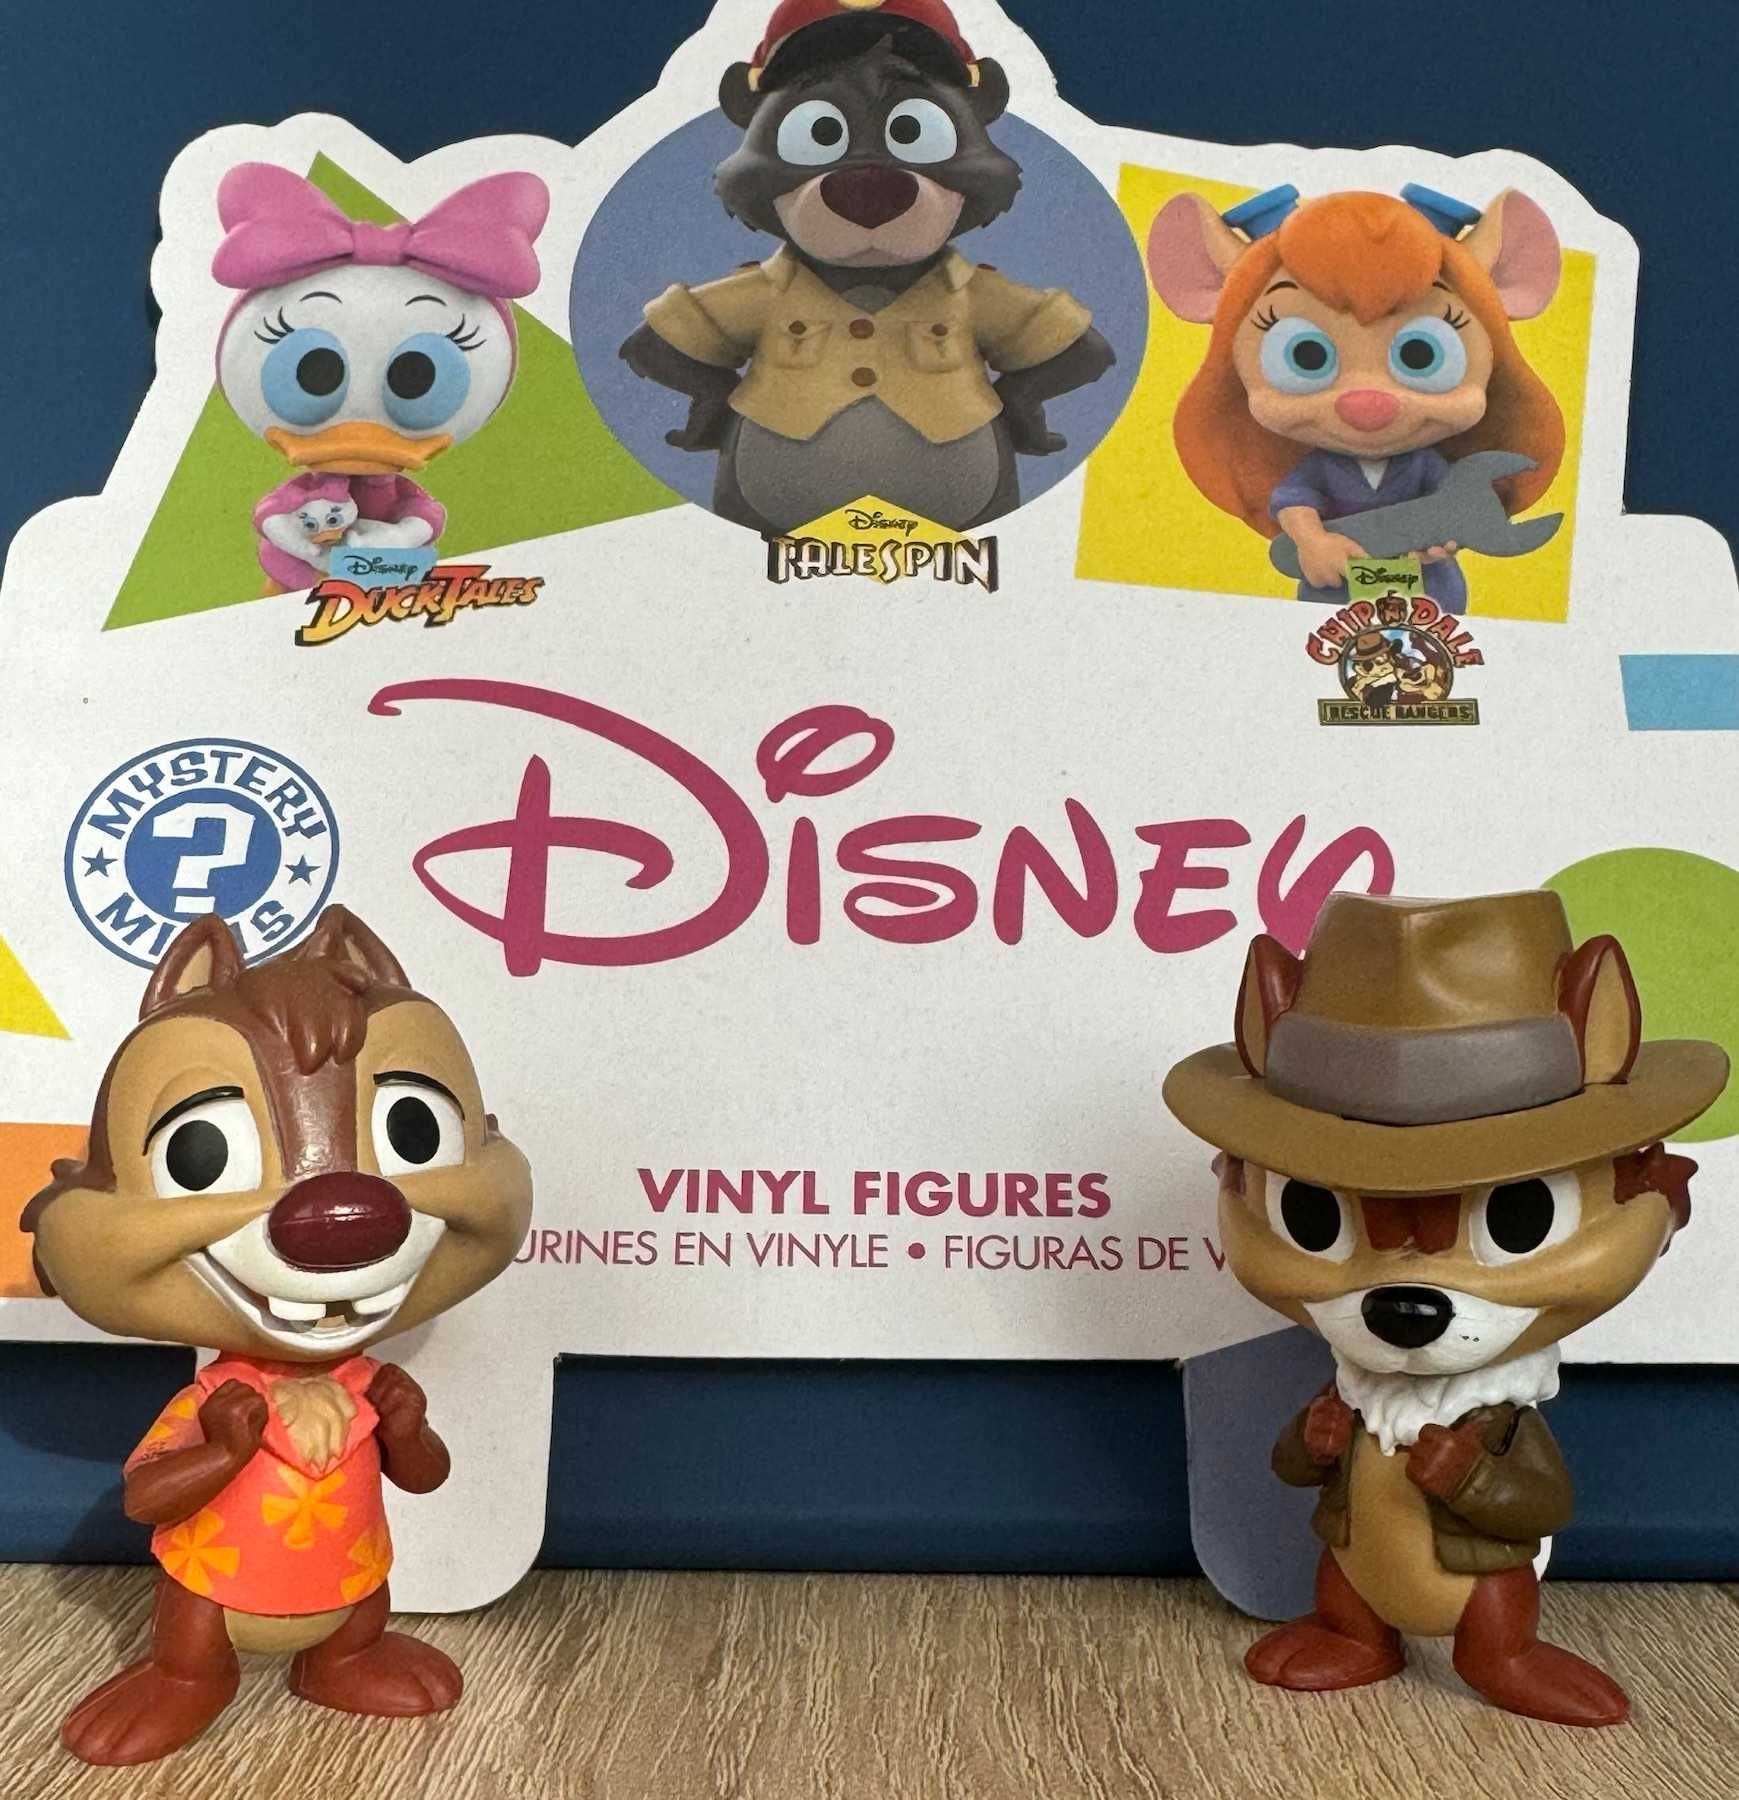 Funko Disney Afternoon: Chip & Dale